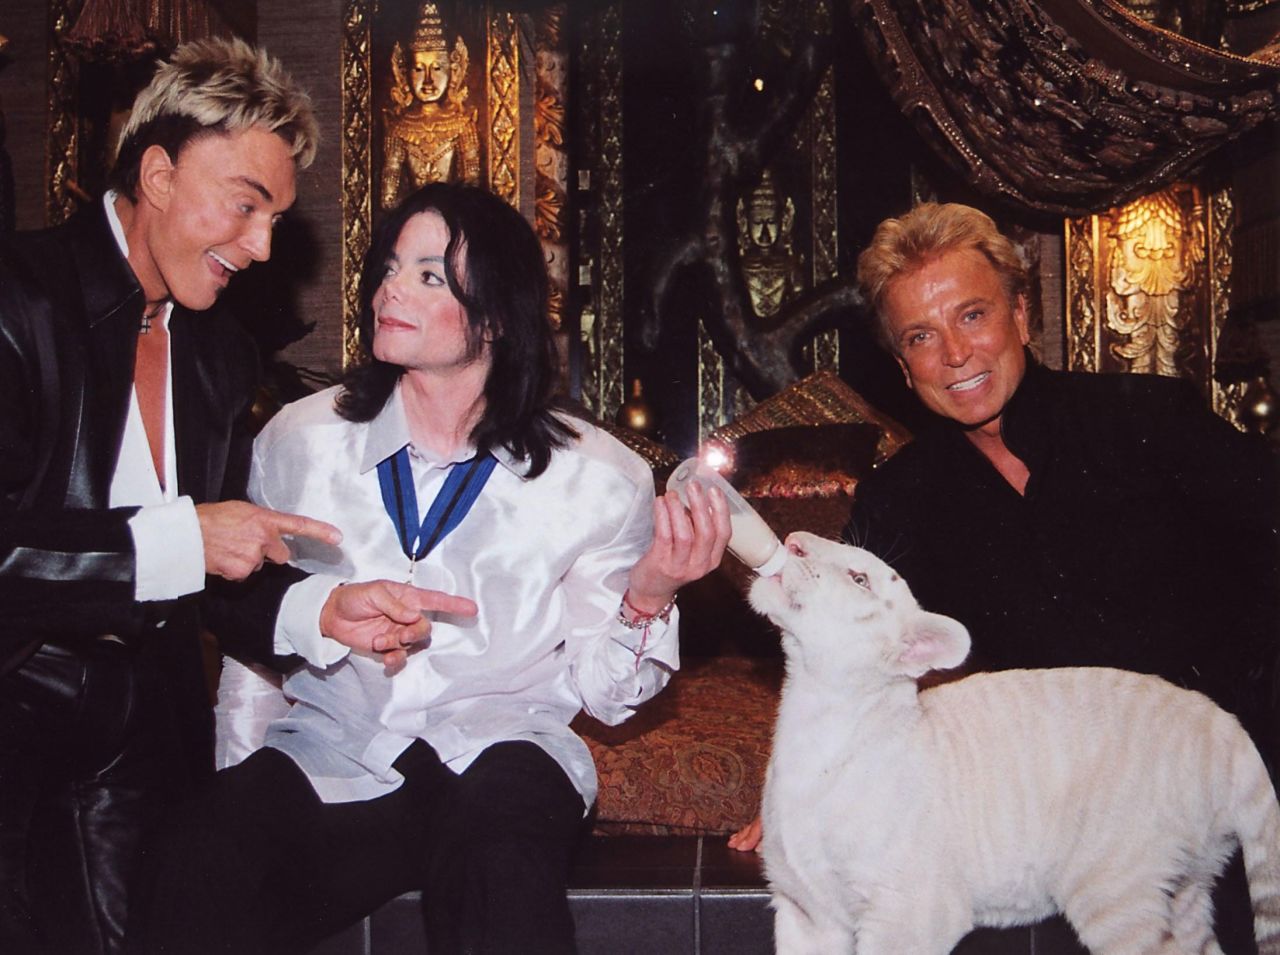 Fischbacher and Horn talk with pop star Michael Jackson as he feeds one of their tigers in Las Vegas in 2002.